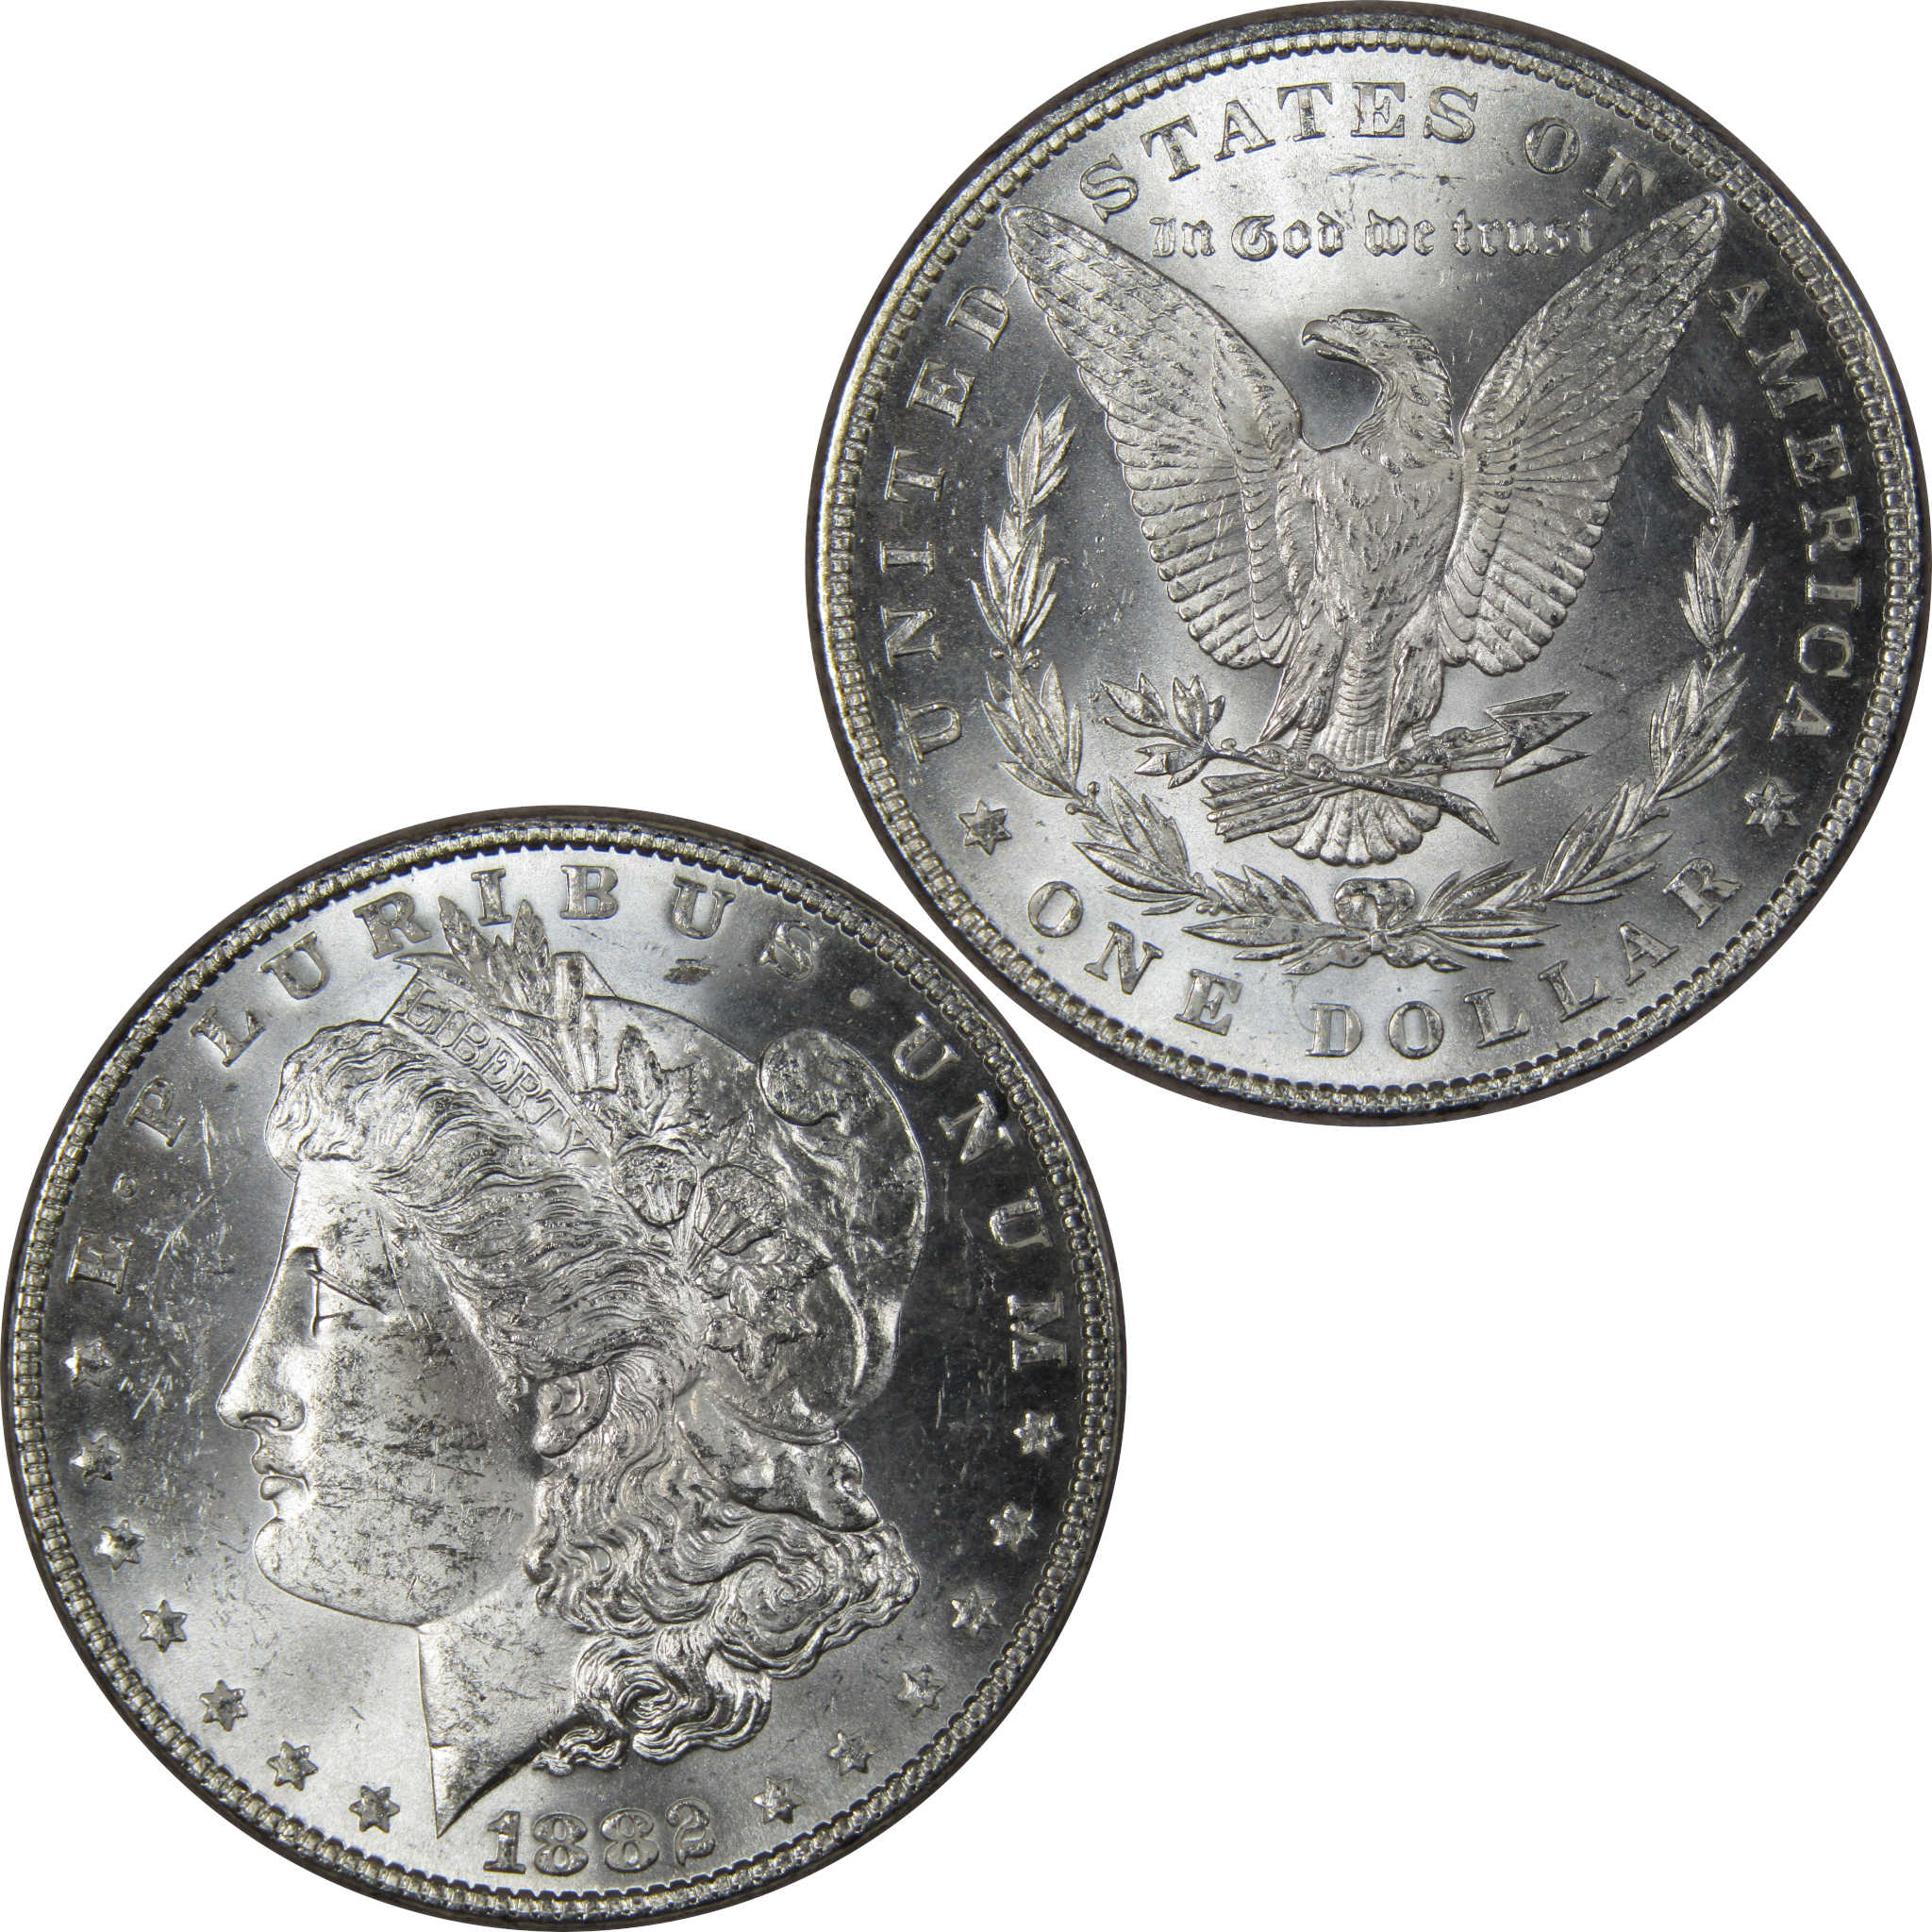 1882 Morgan Dollar BU Uncirculated Mint State 90% Silver SKU:IPC9681 - Morgan coin - Morgan silver dollar - Morgan silver dollar for sale - Profile Coins &amp; Collectibles